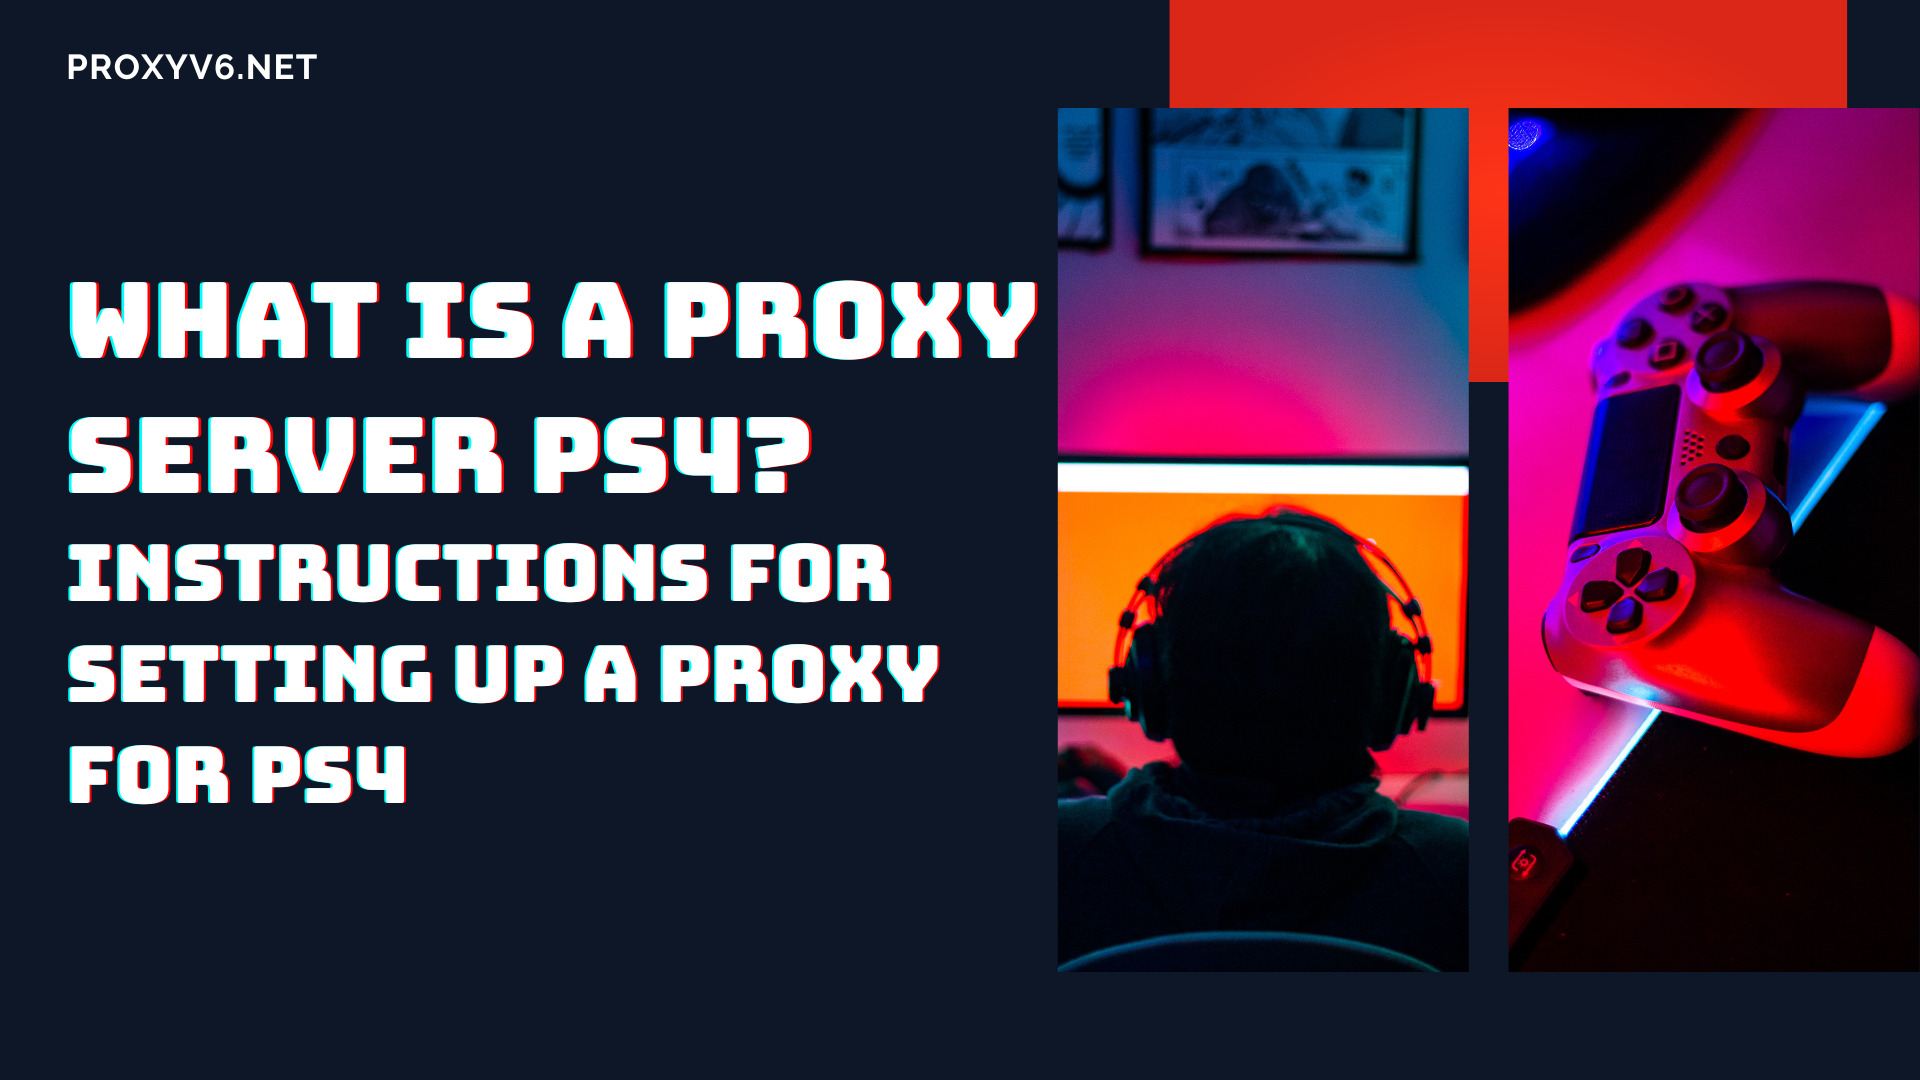 What is a Proxy Server PS4? Instructions for setting up a Proxy for PS4